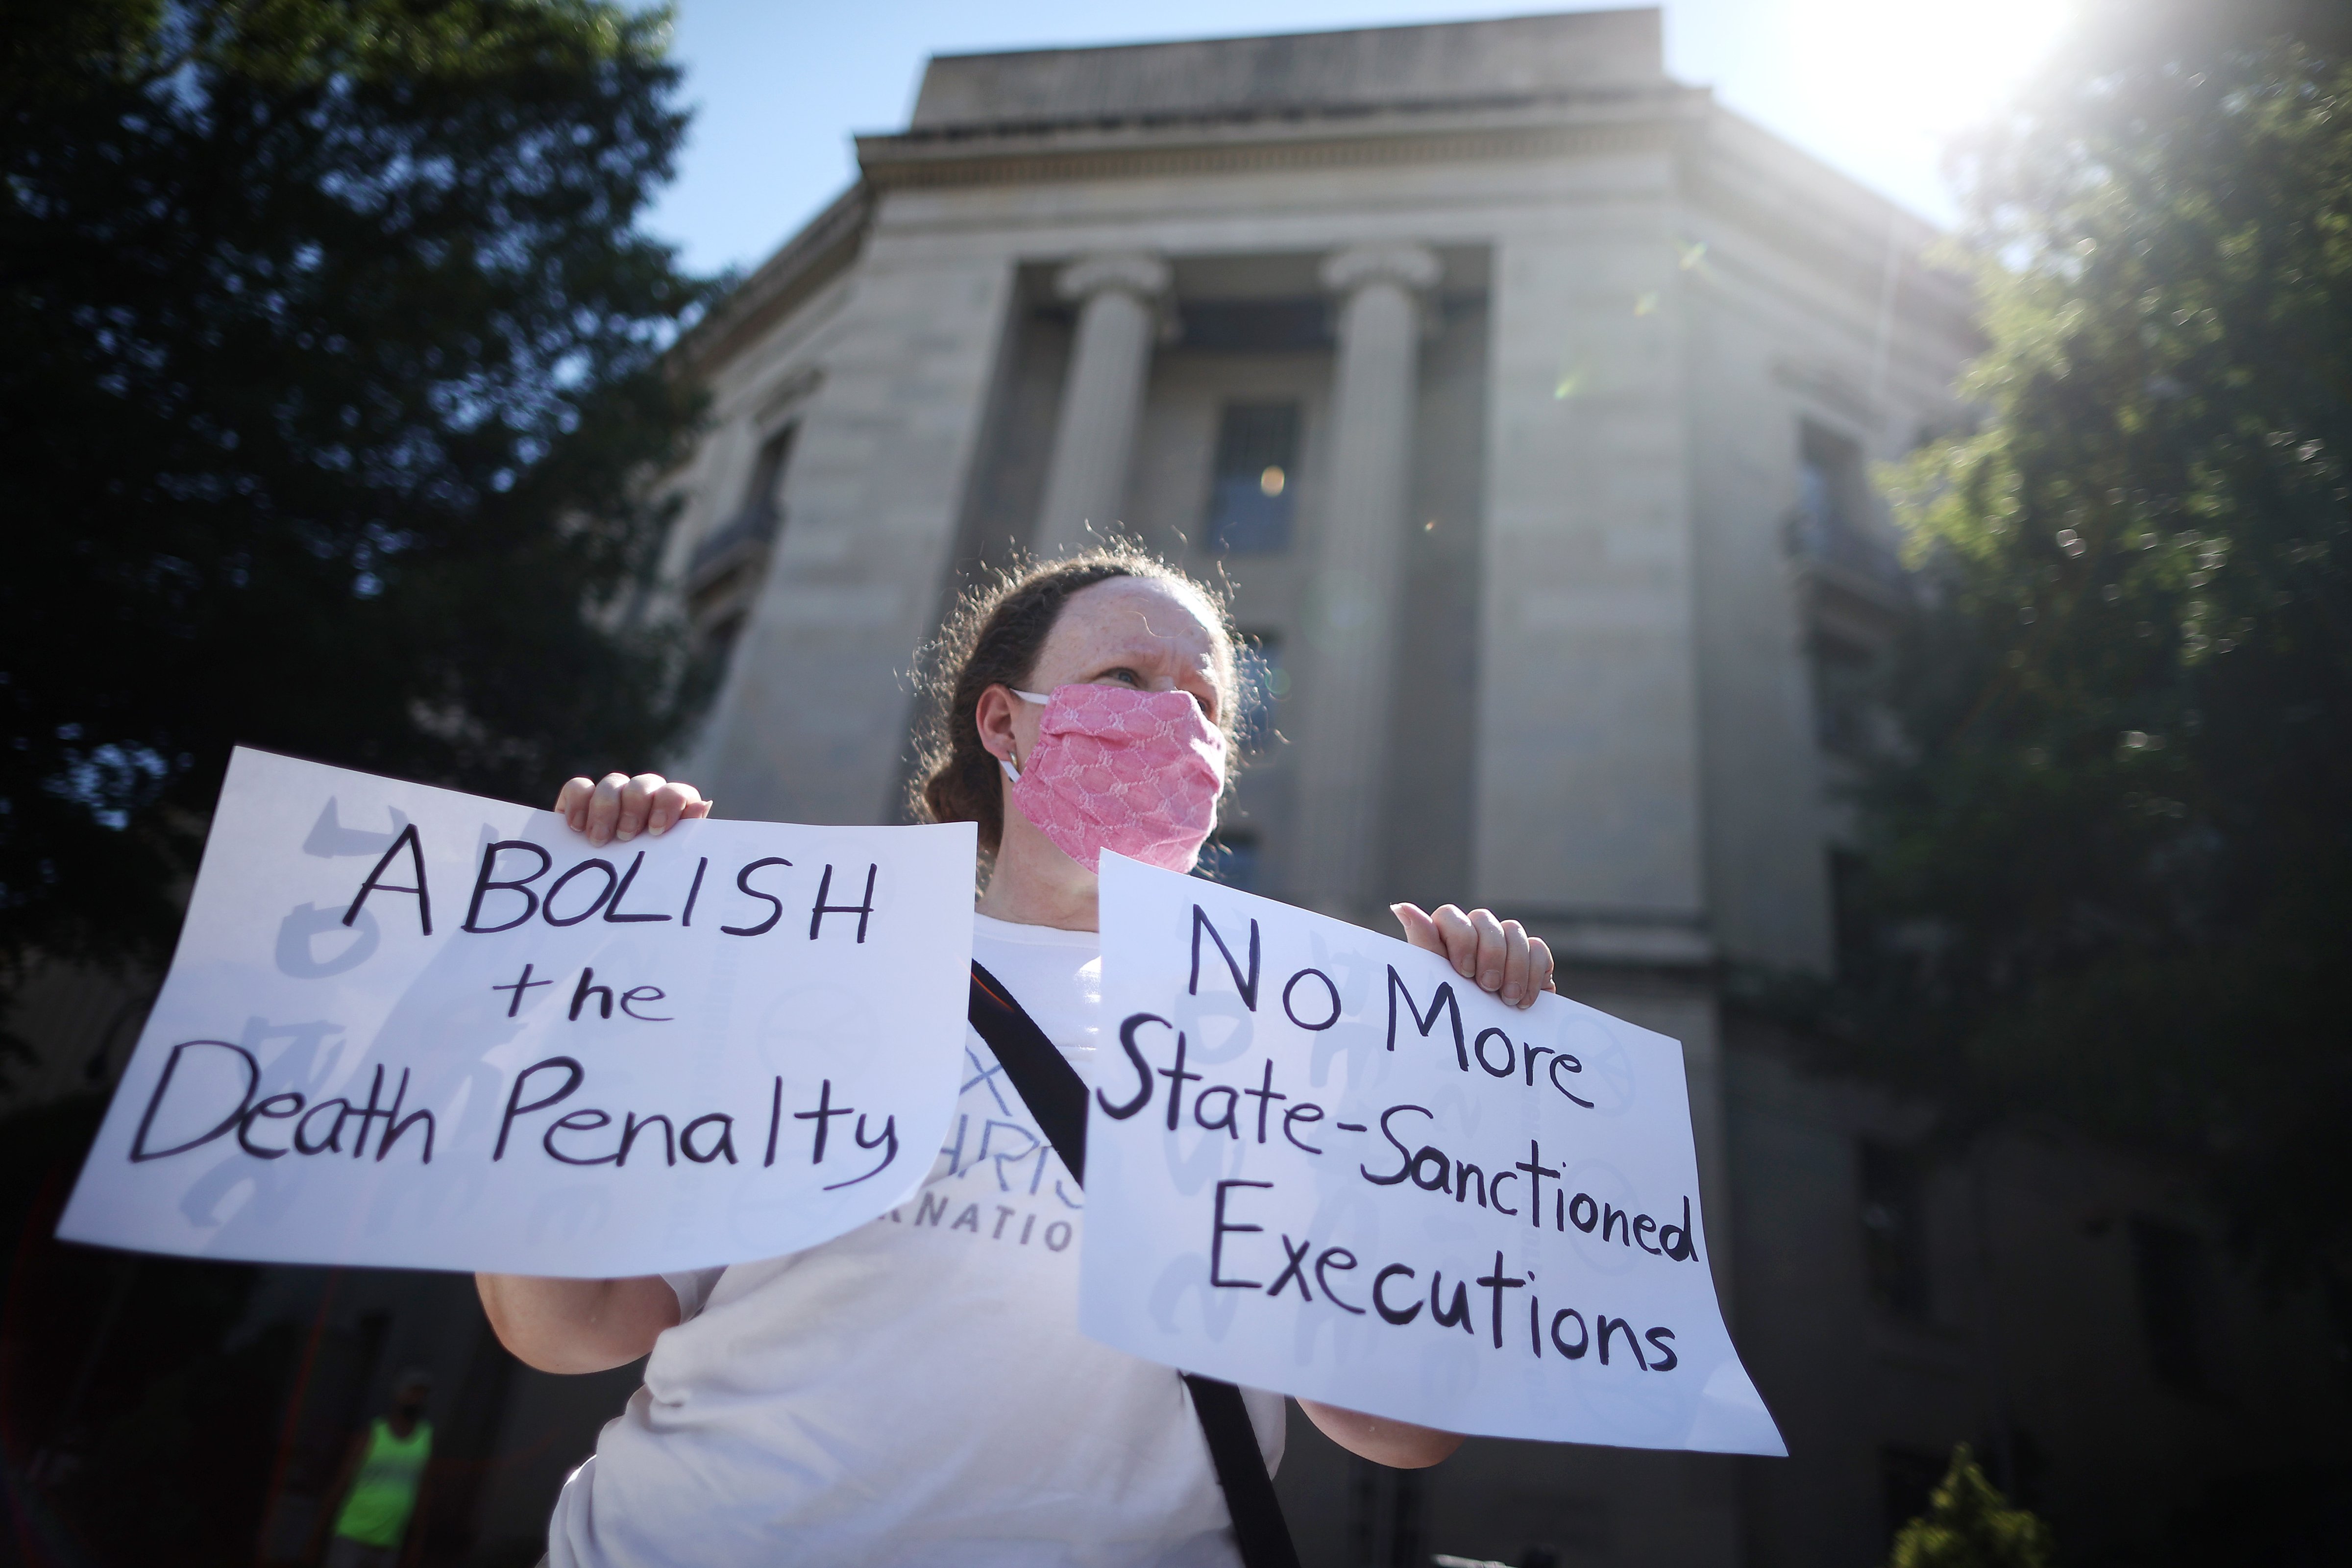 Anti-death penalty activist Judy Coode demonstrates in front of the U.S. Justice Department on July 13, 2020 in Washington, D.C. (Chip Somodevilla—Getty Images)